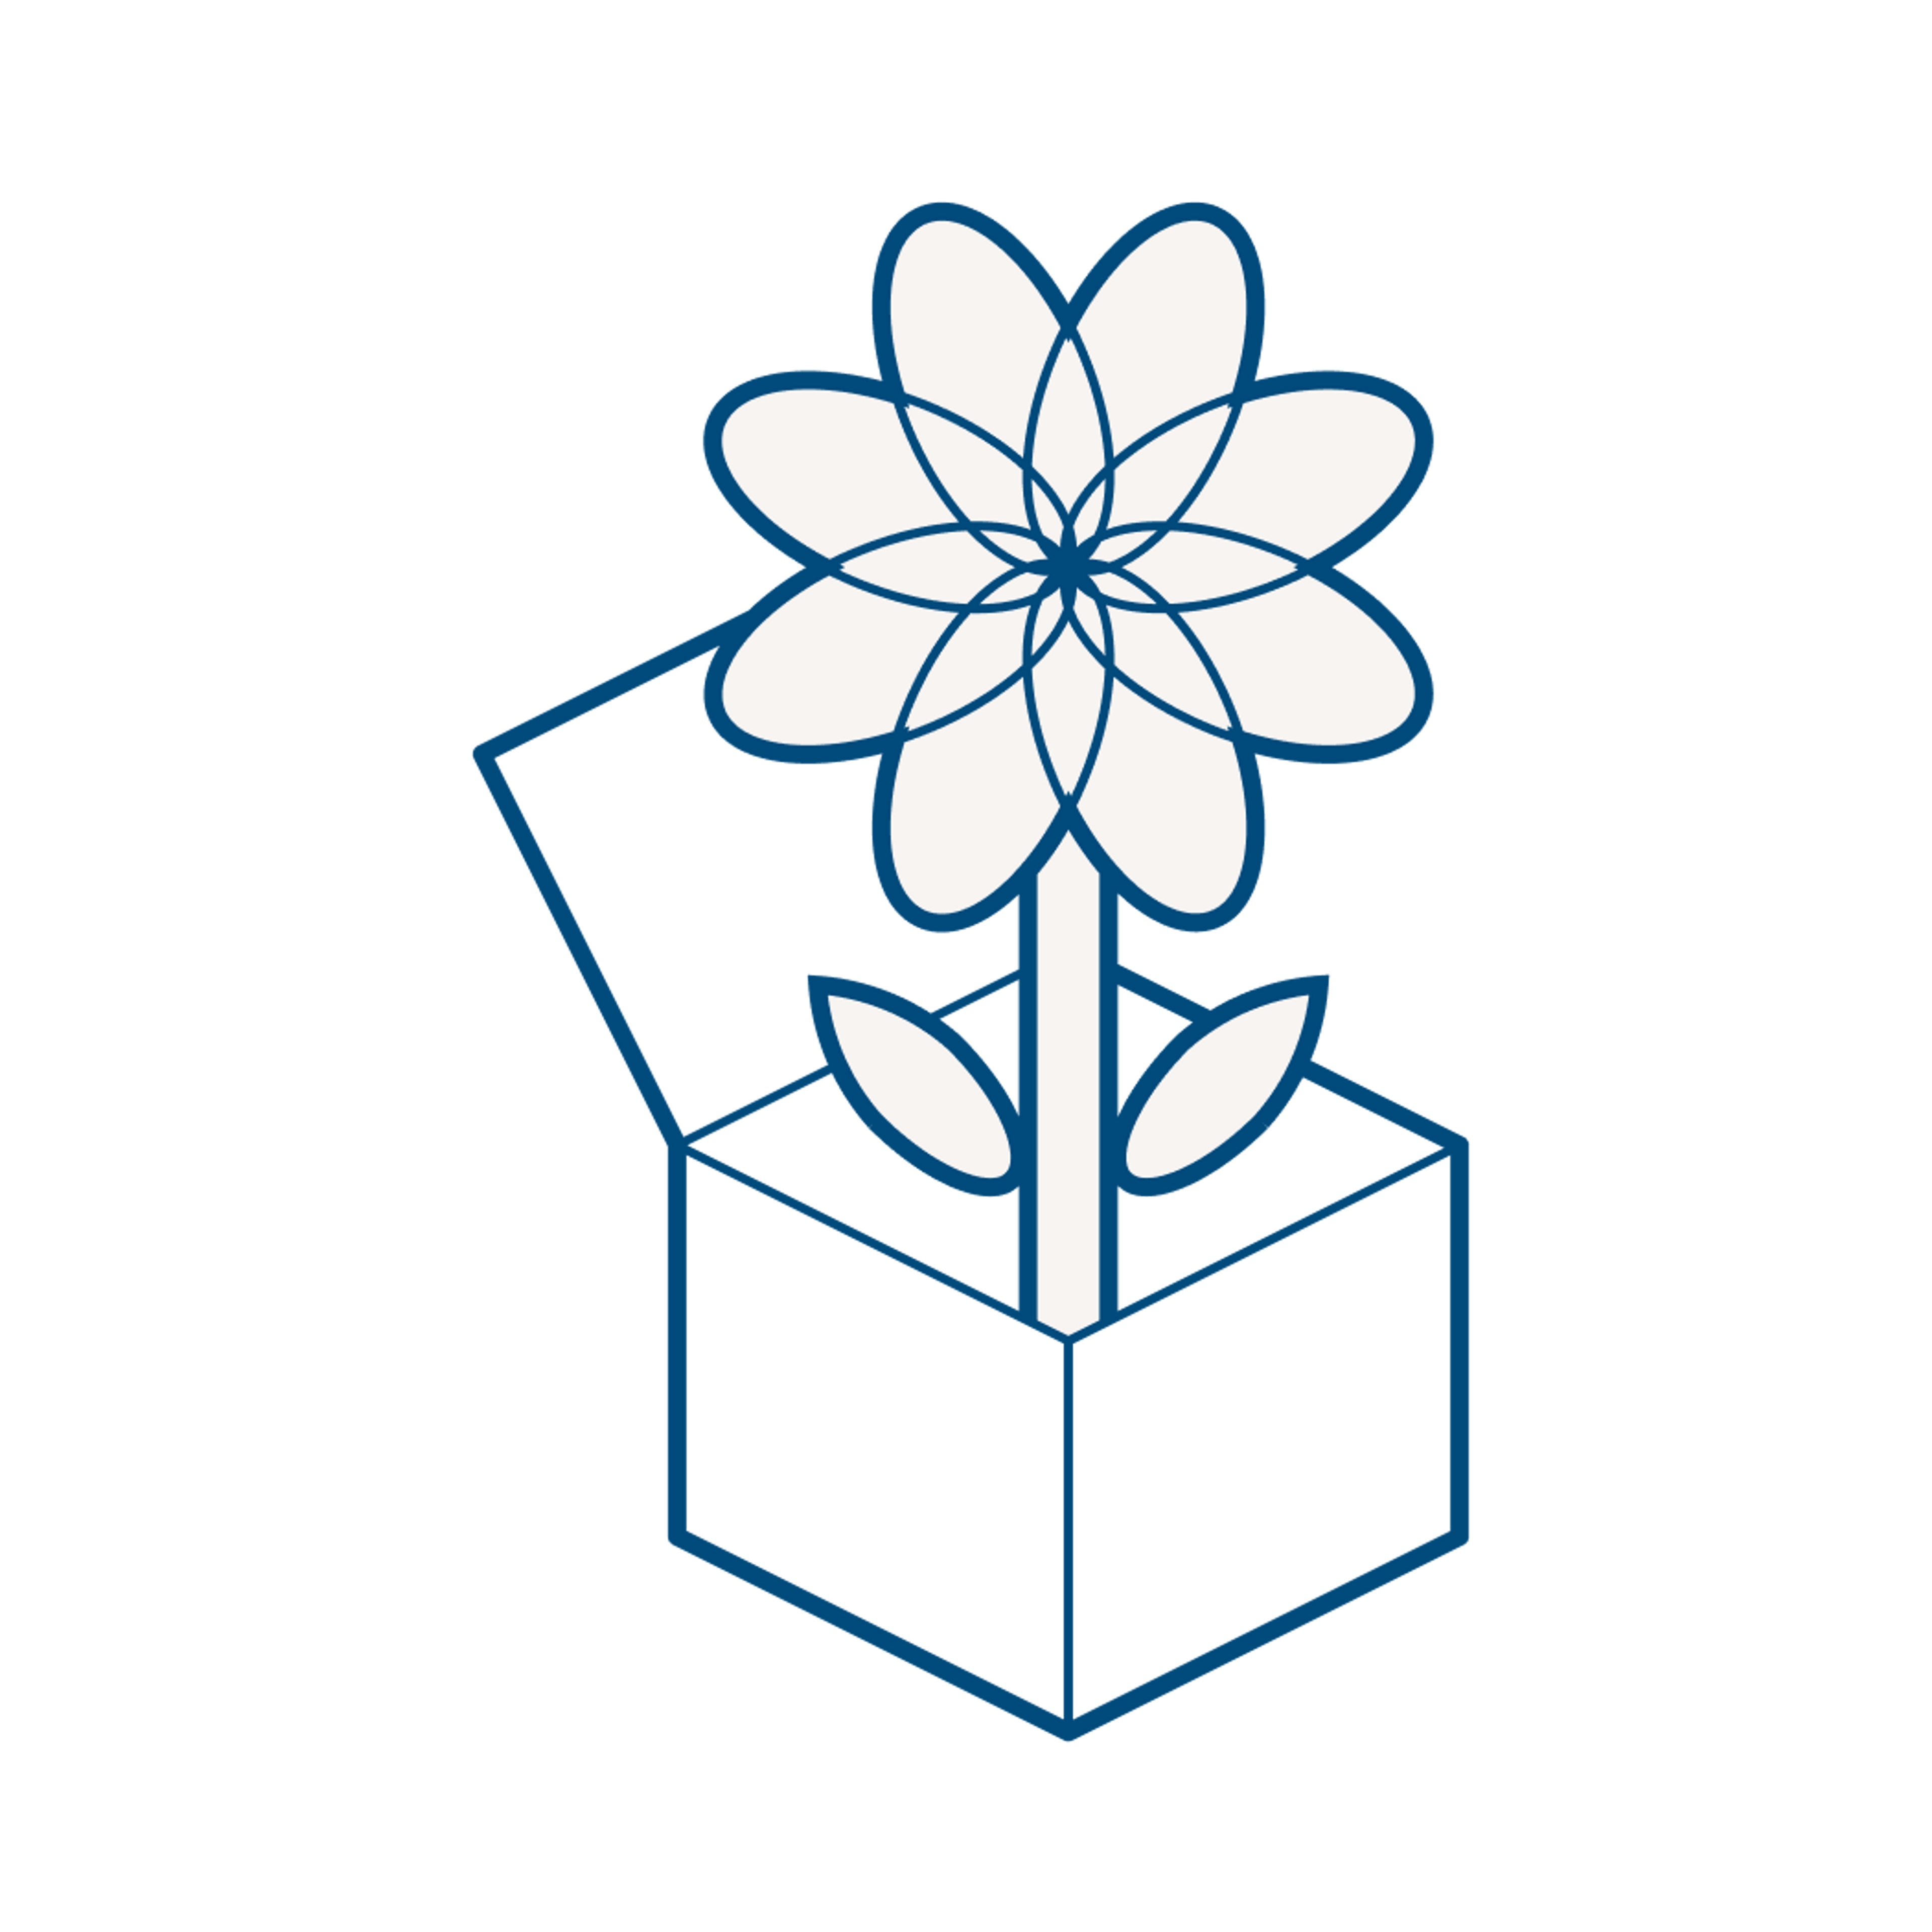 A large icon of a flower rising from a box